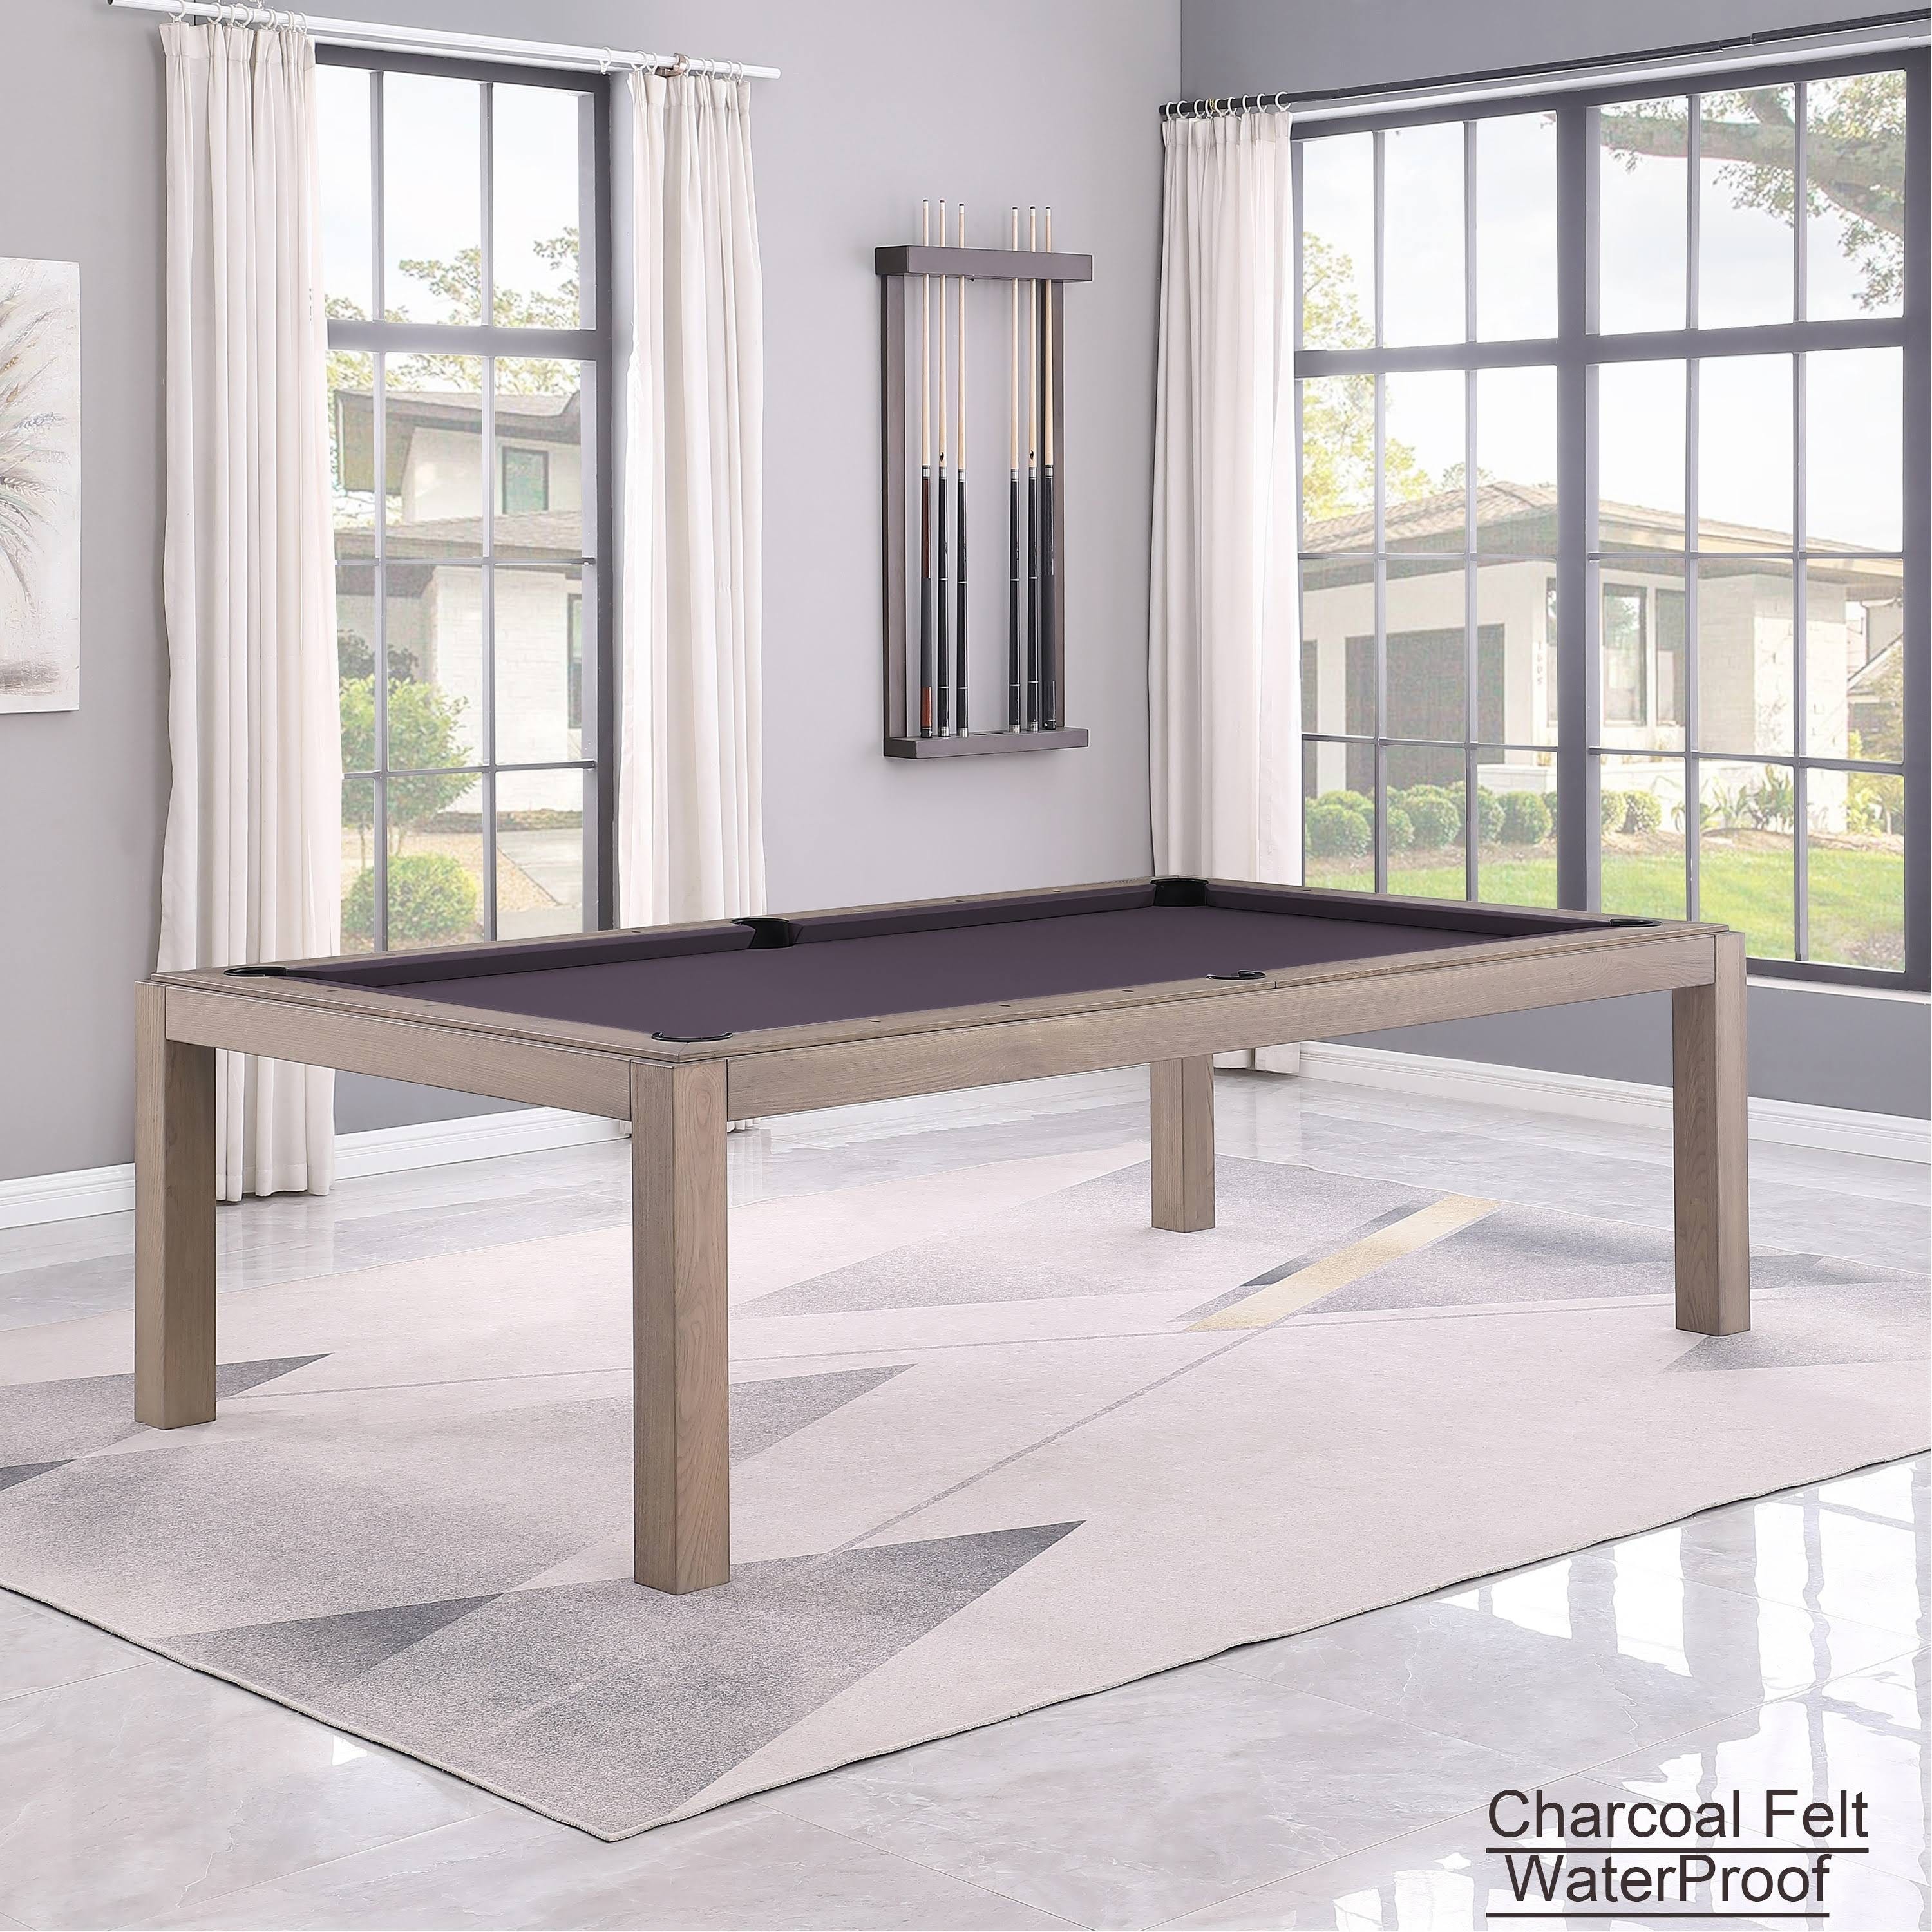 Olivia Greywash 7ft Pool Table with Dining Top | Image